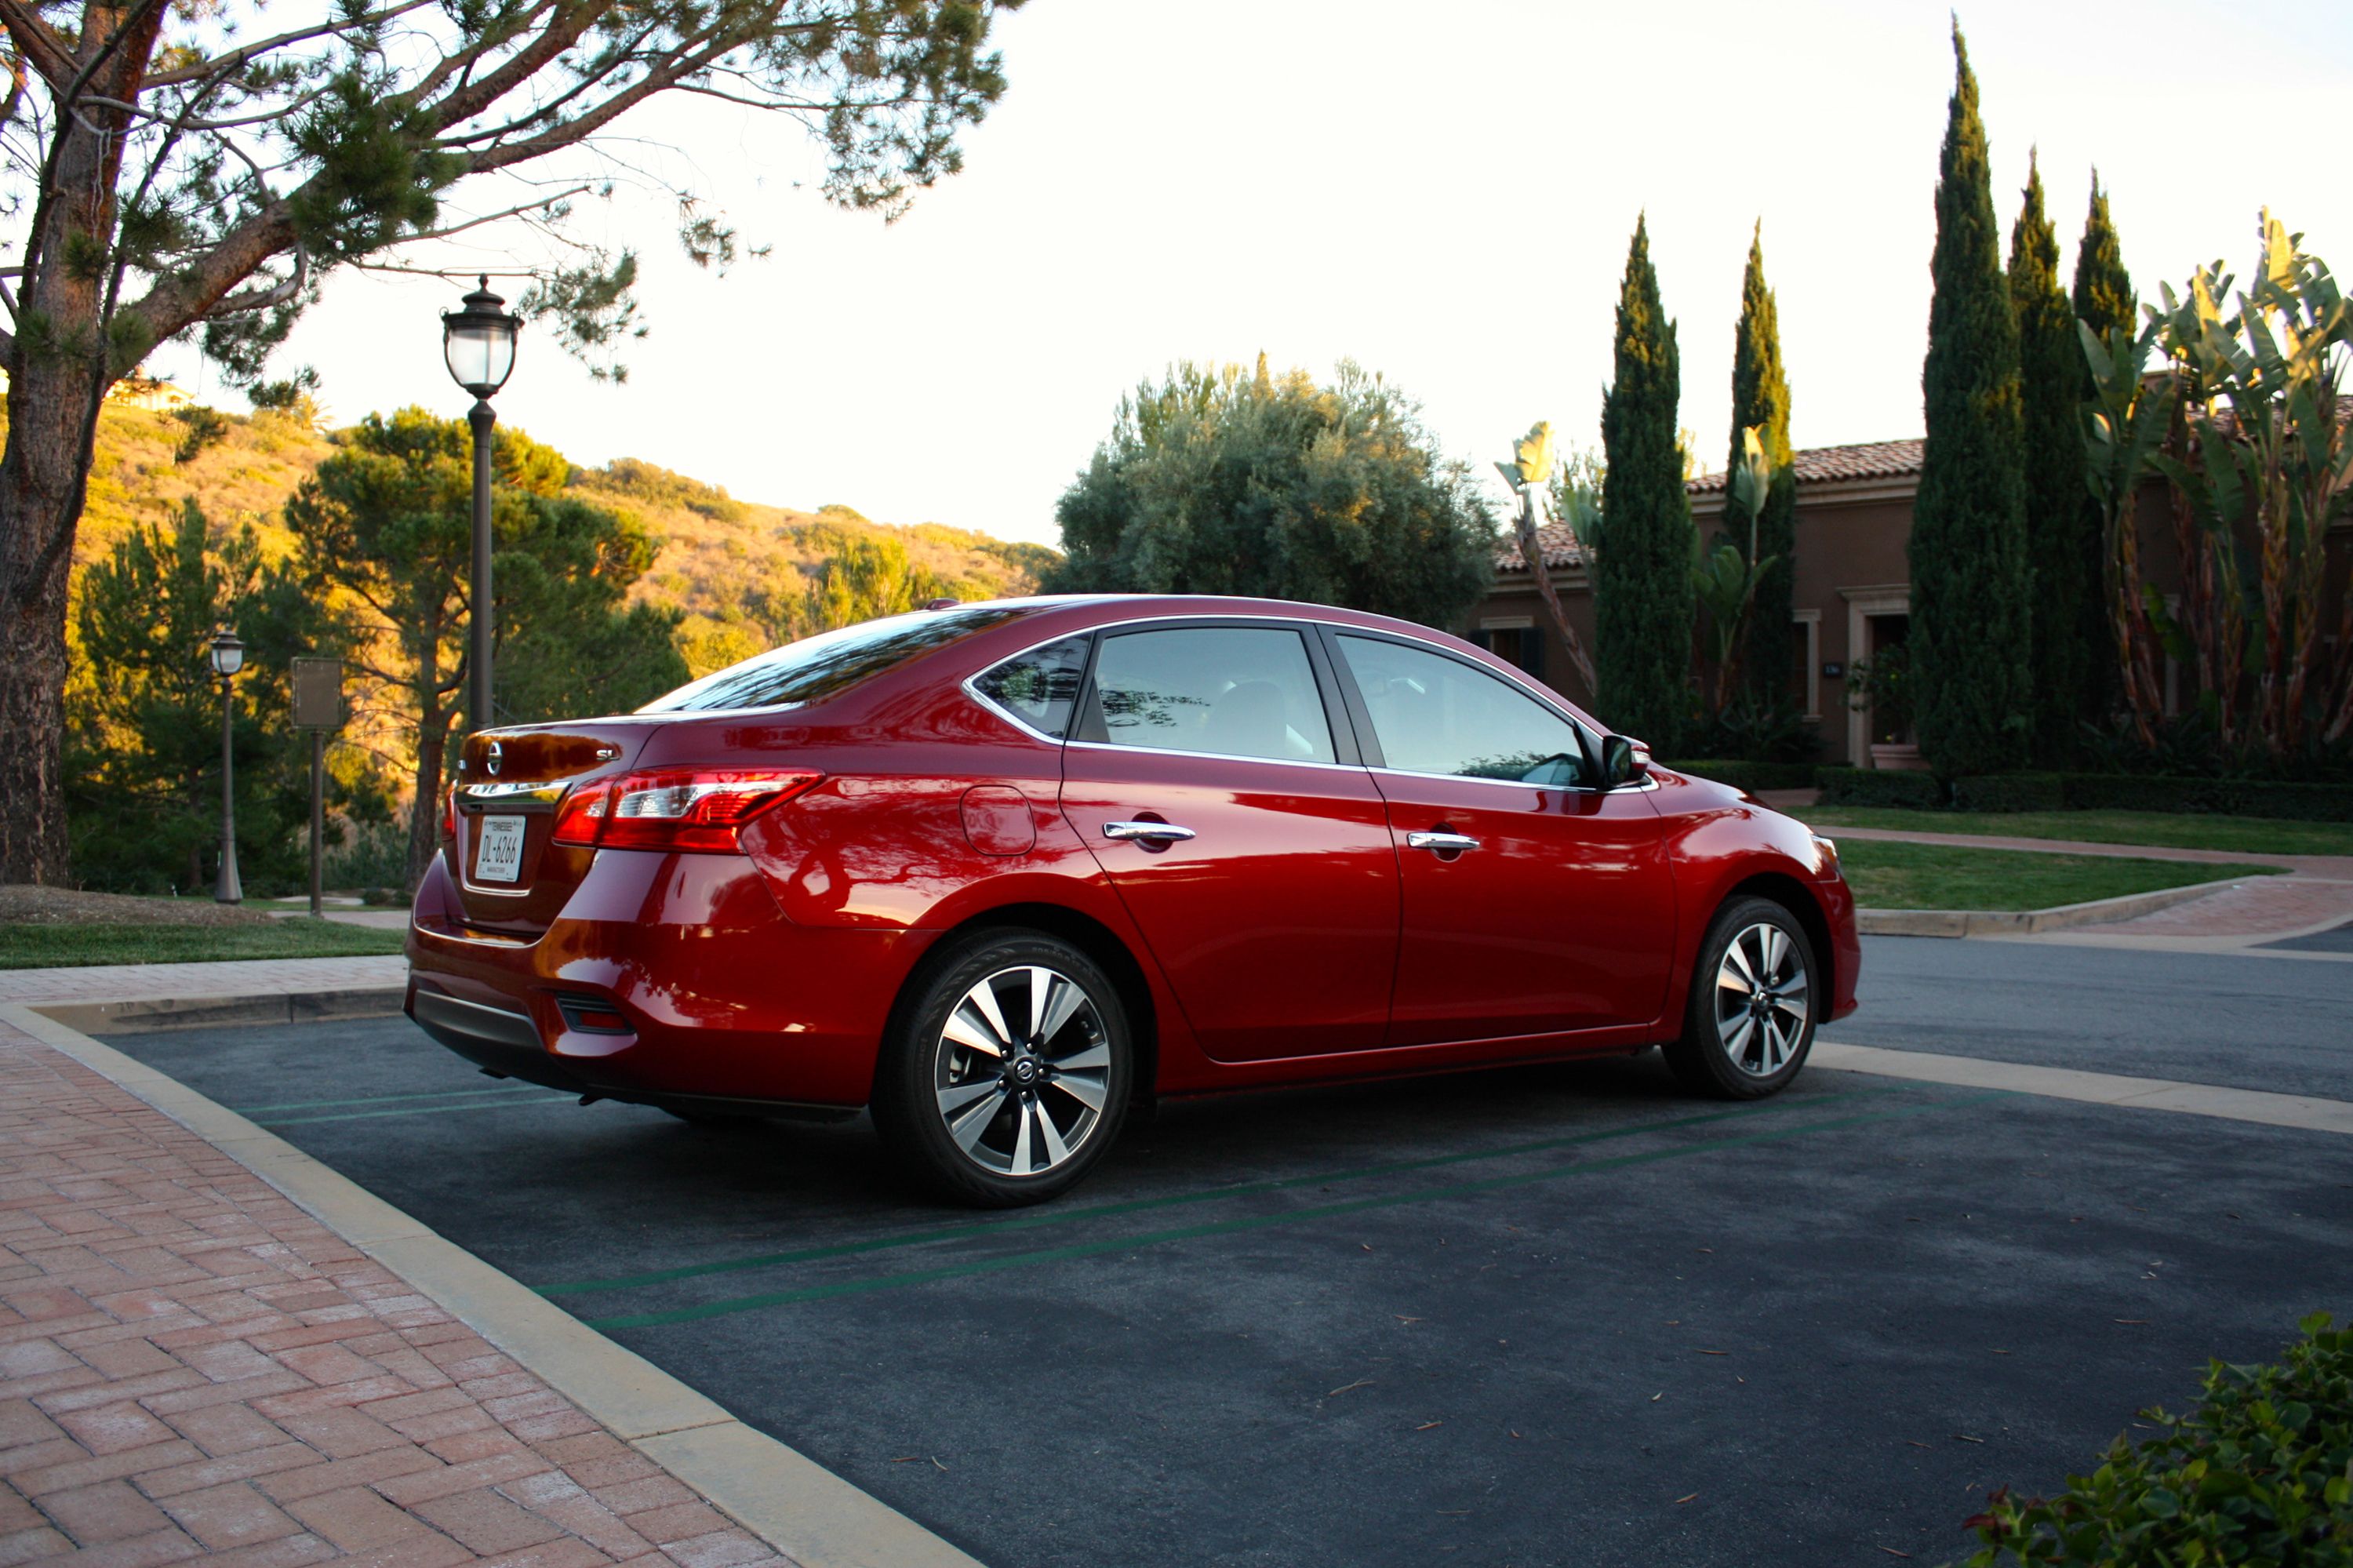 2016 Nissan Sentra – Driving Impression And Review